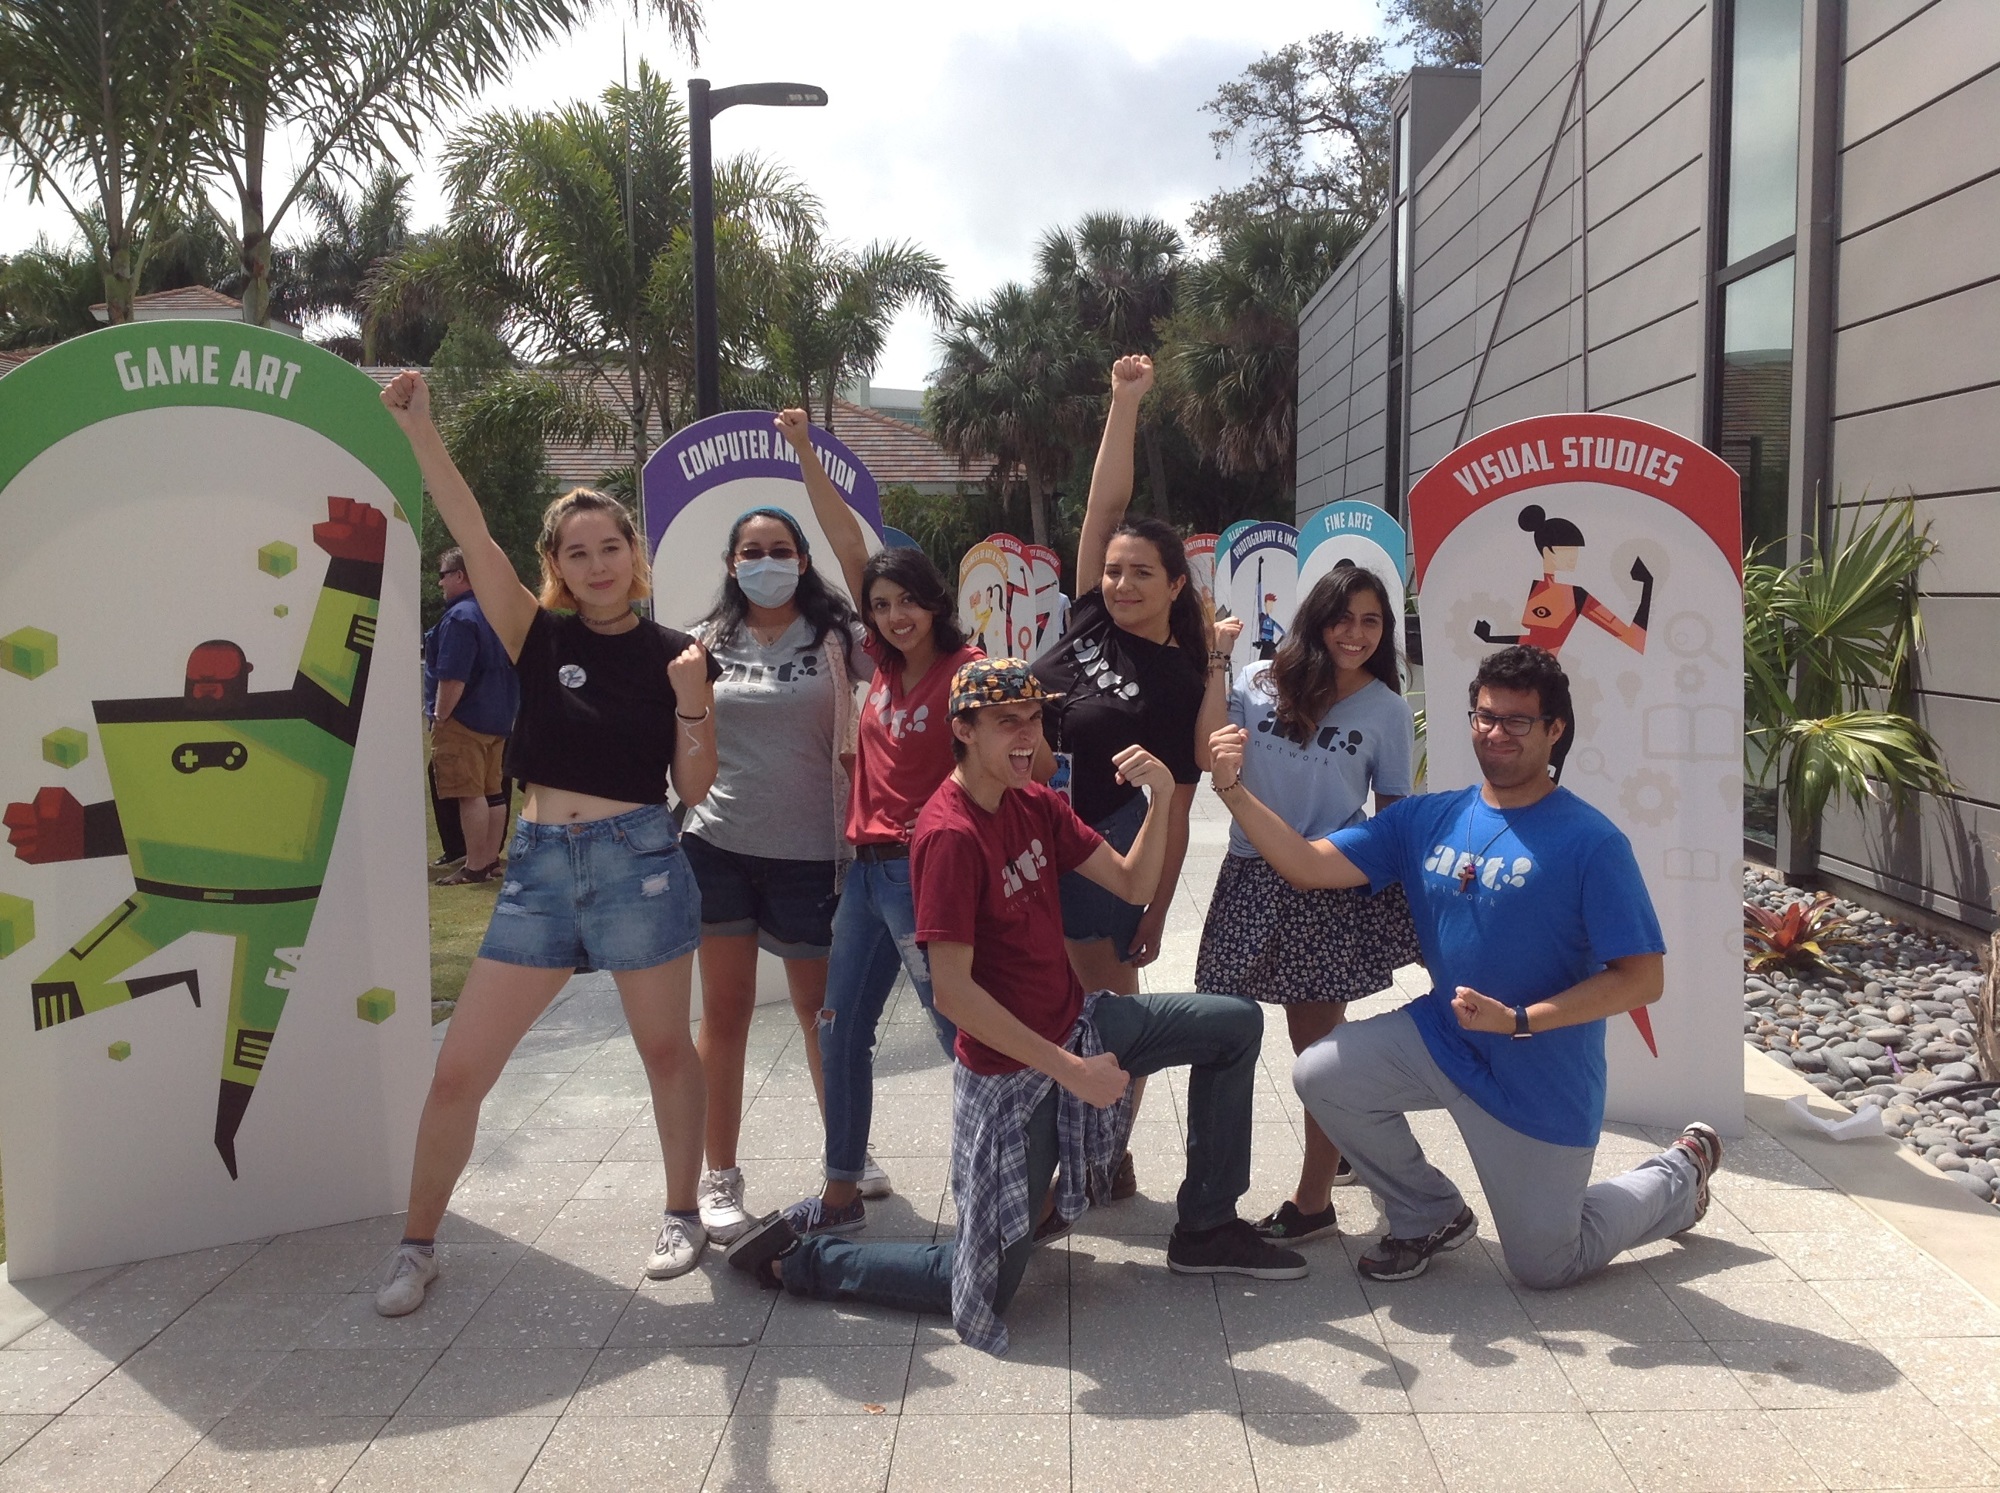 Students at Ringling College of Art and Design's accepted student day held April 7, 2018, posed with cardboard cutouts of superhero characters representing the college's majors.